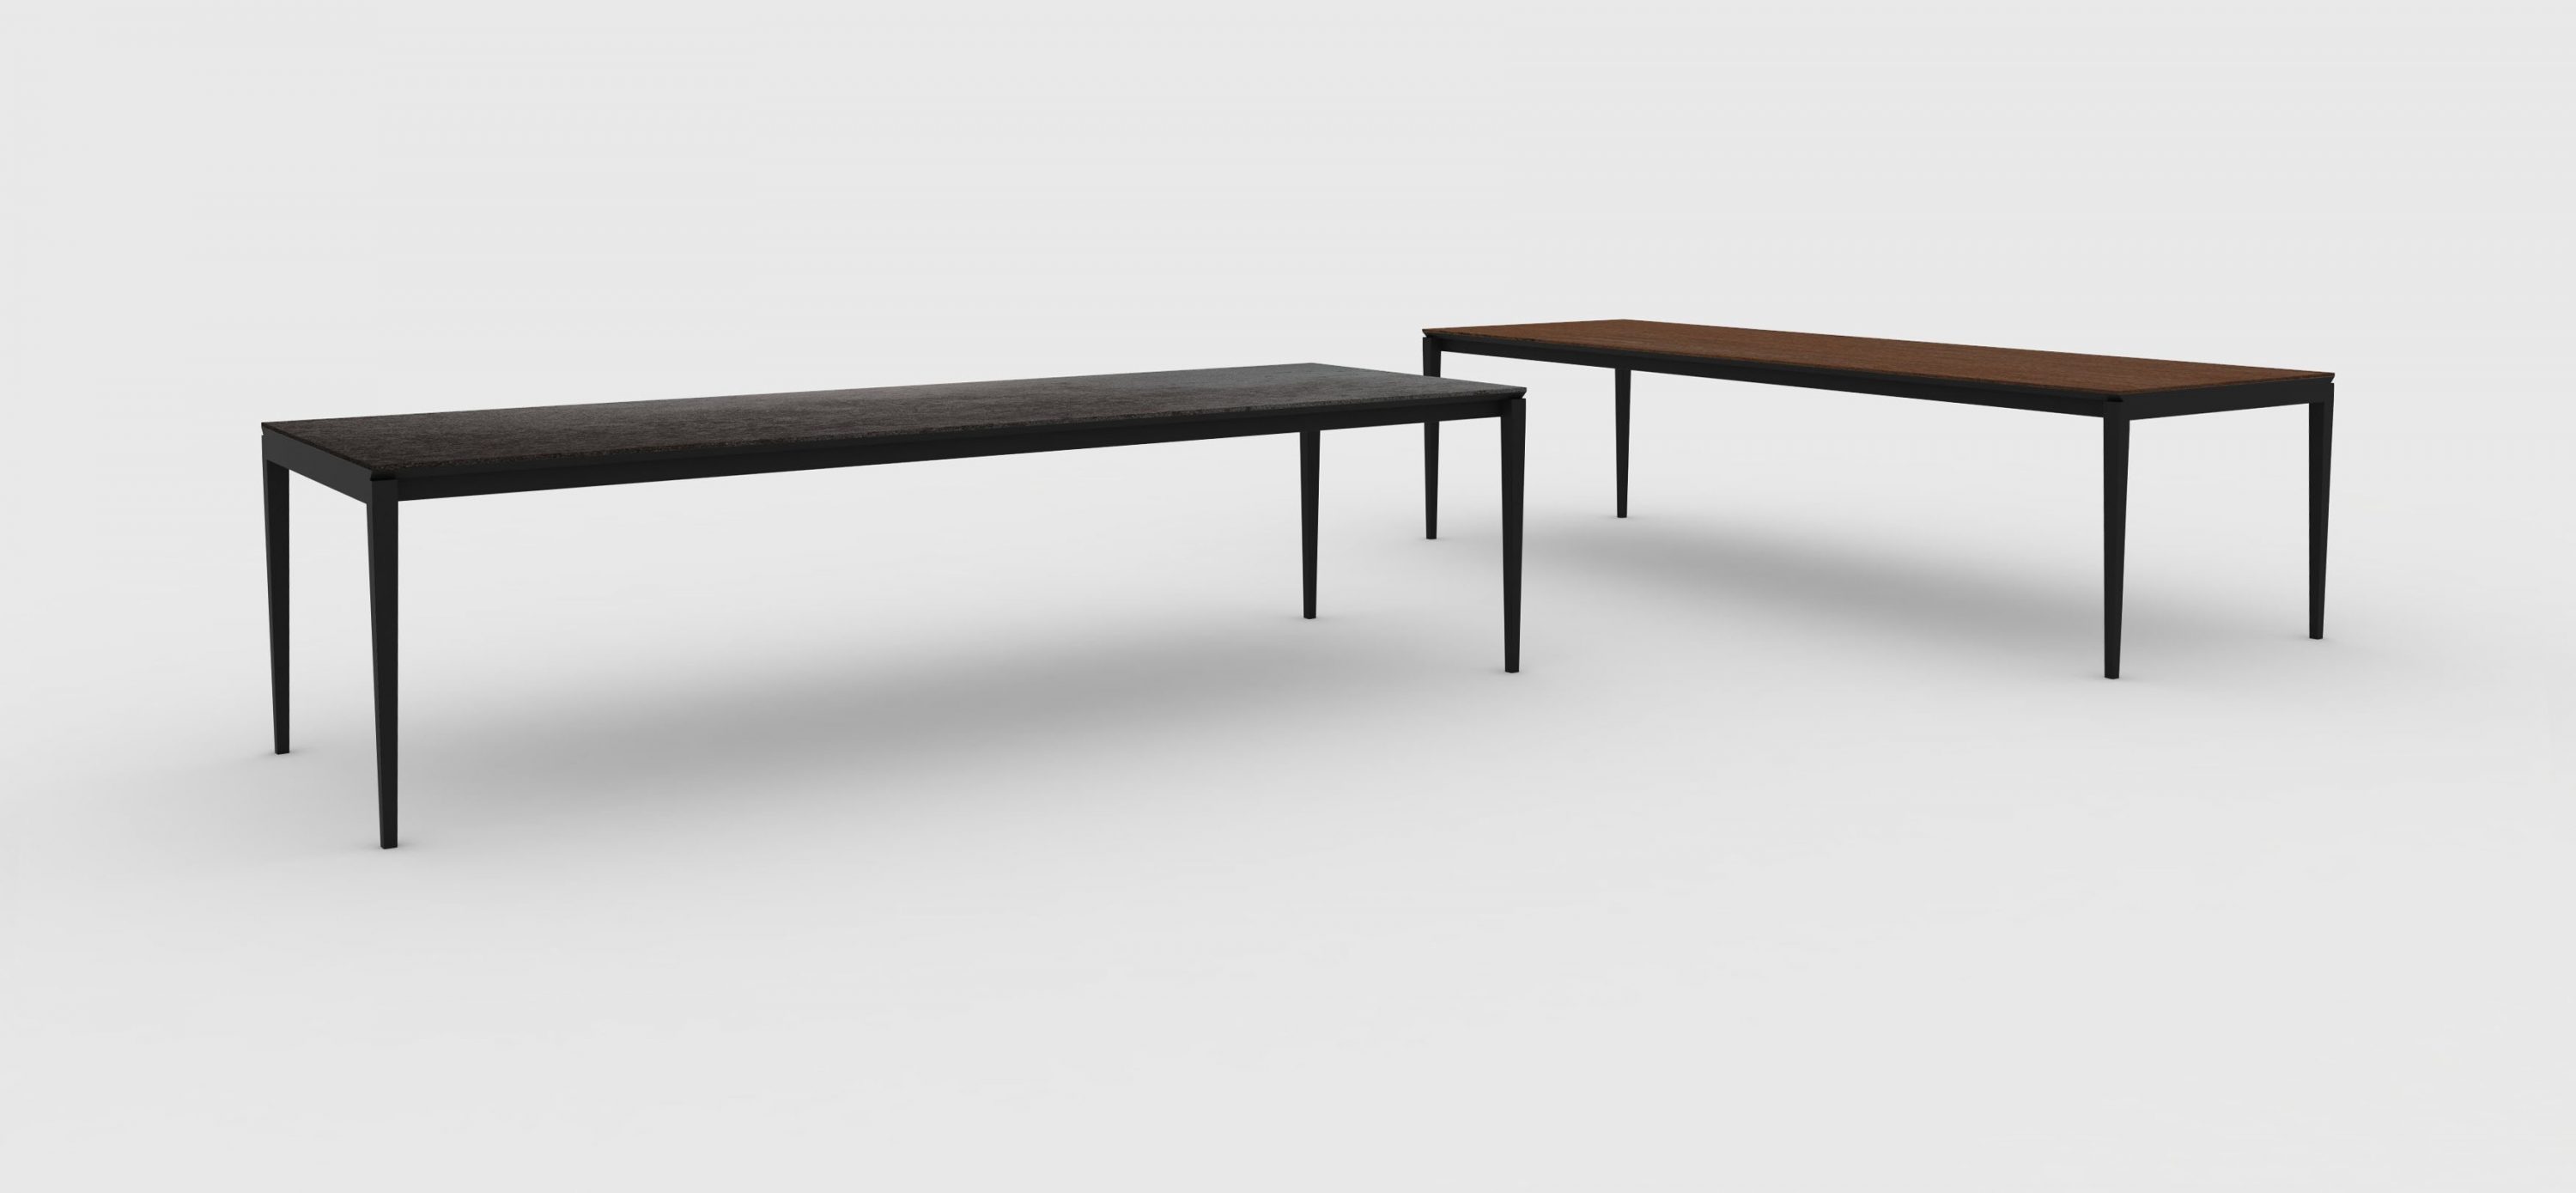 LARGE TABLE